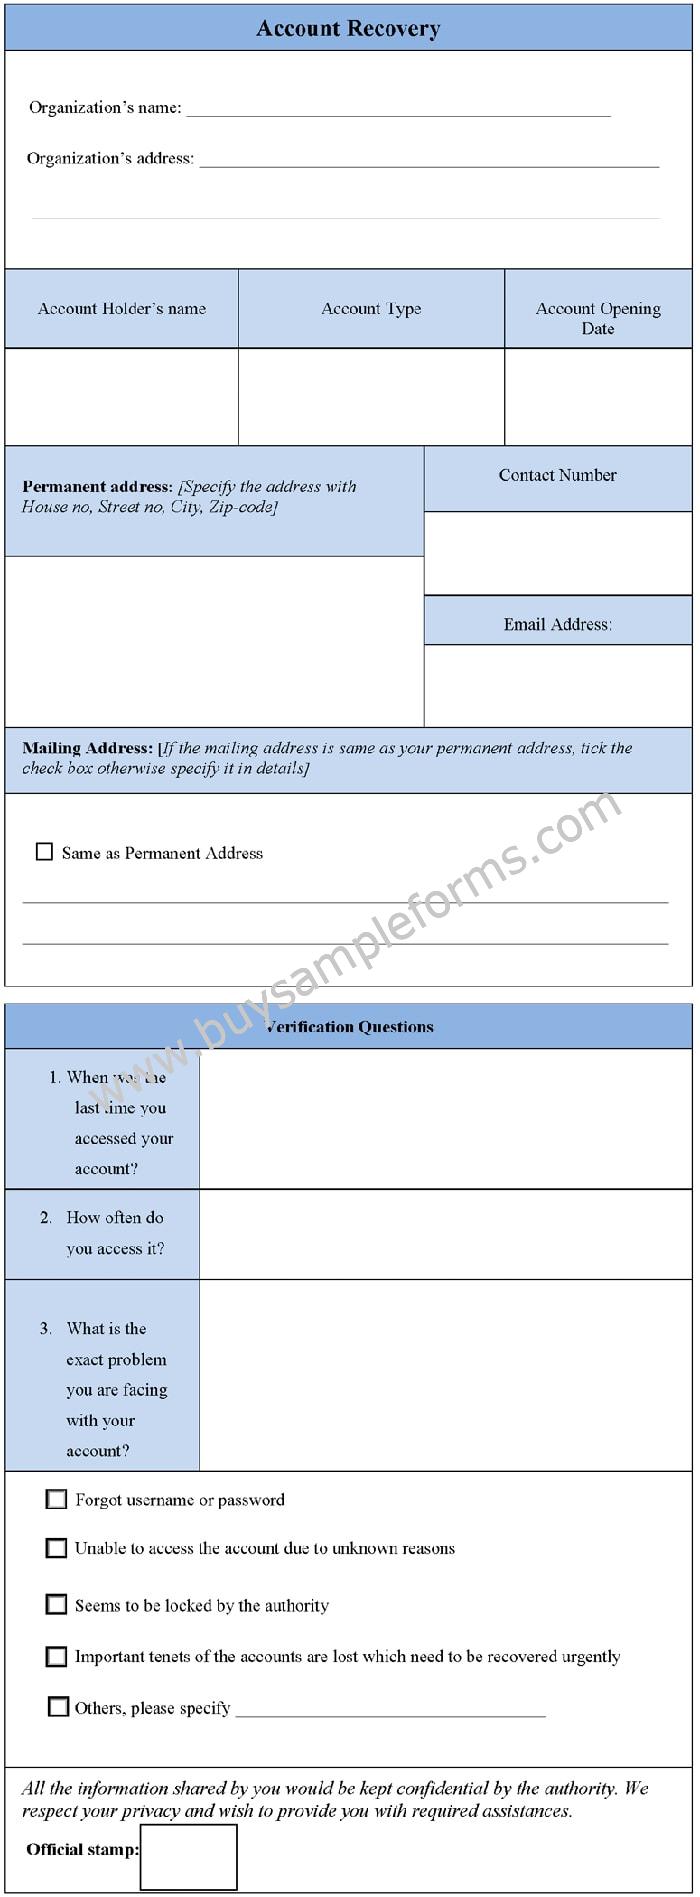 sample-account-recovery-form-template-in-word-format